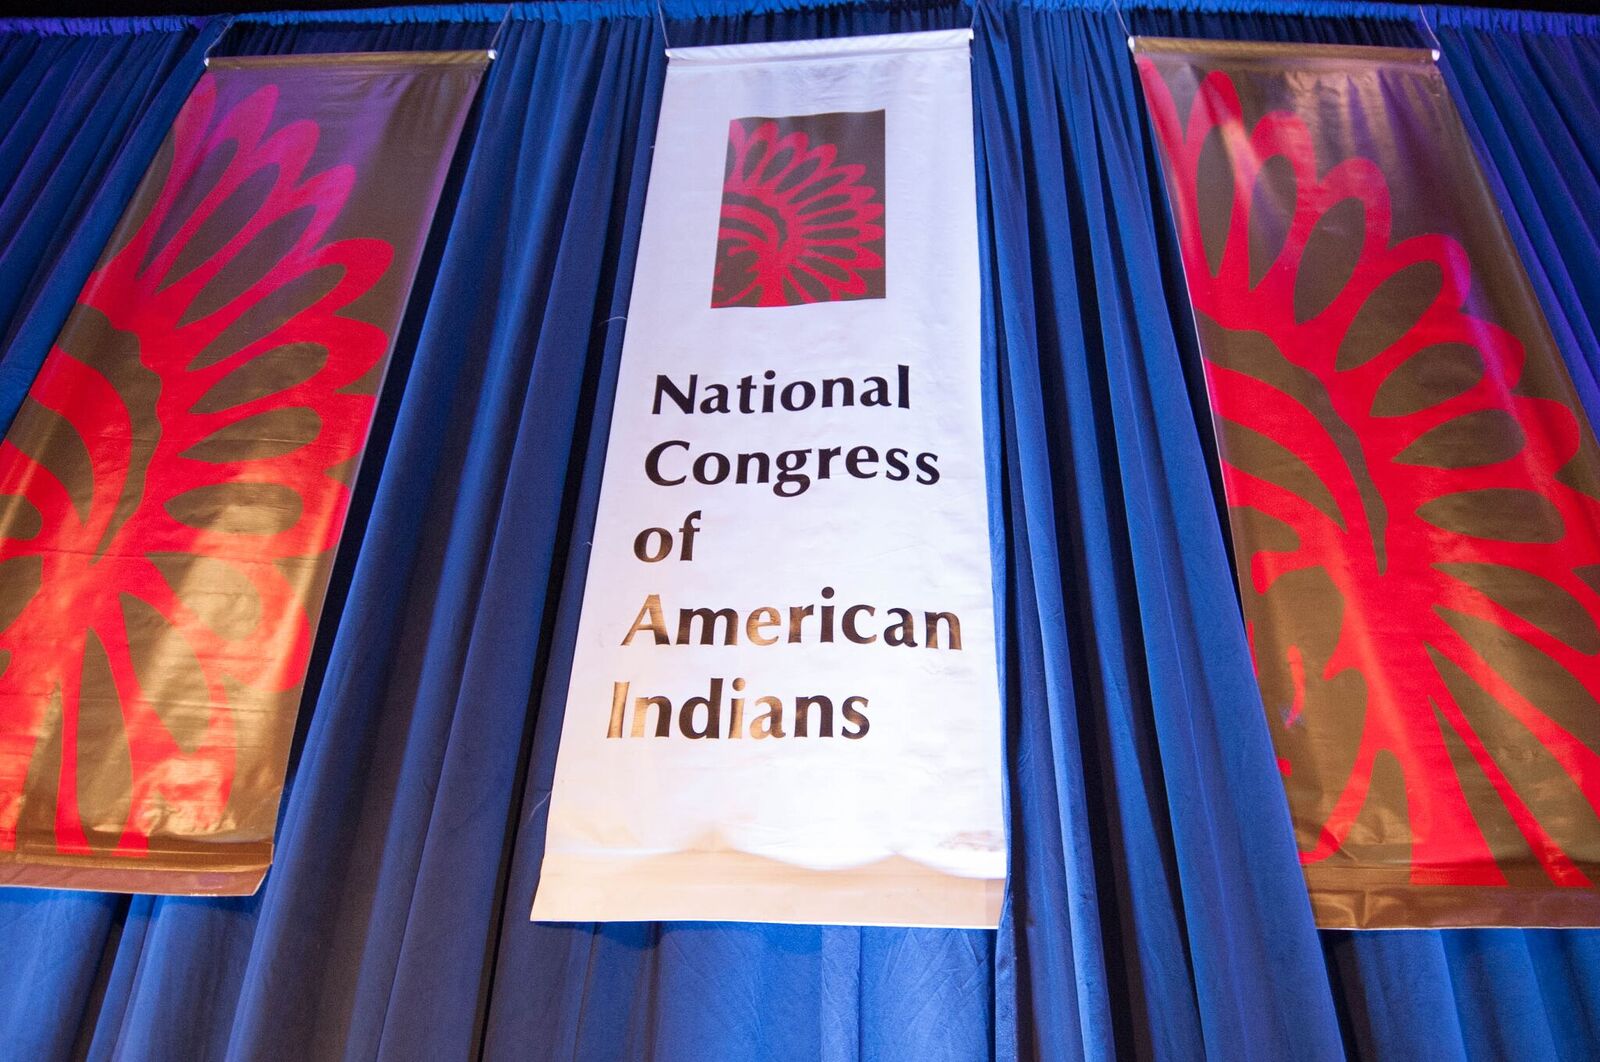 Tribes demand accountability from National Congress of American Indians